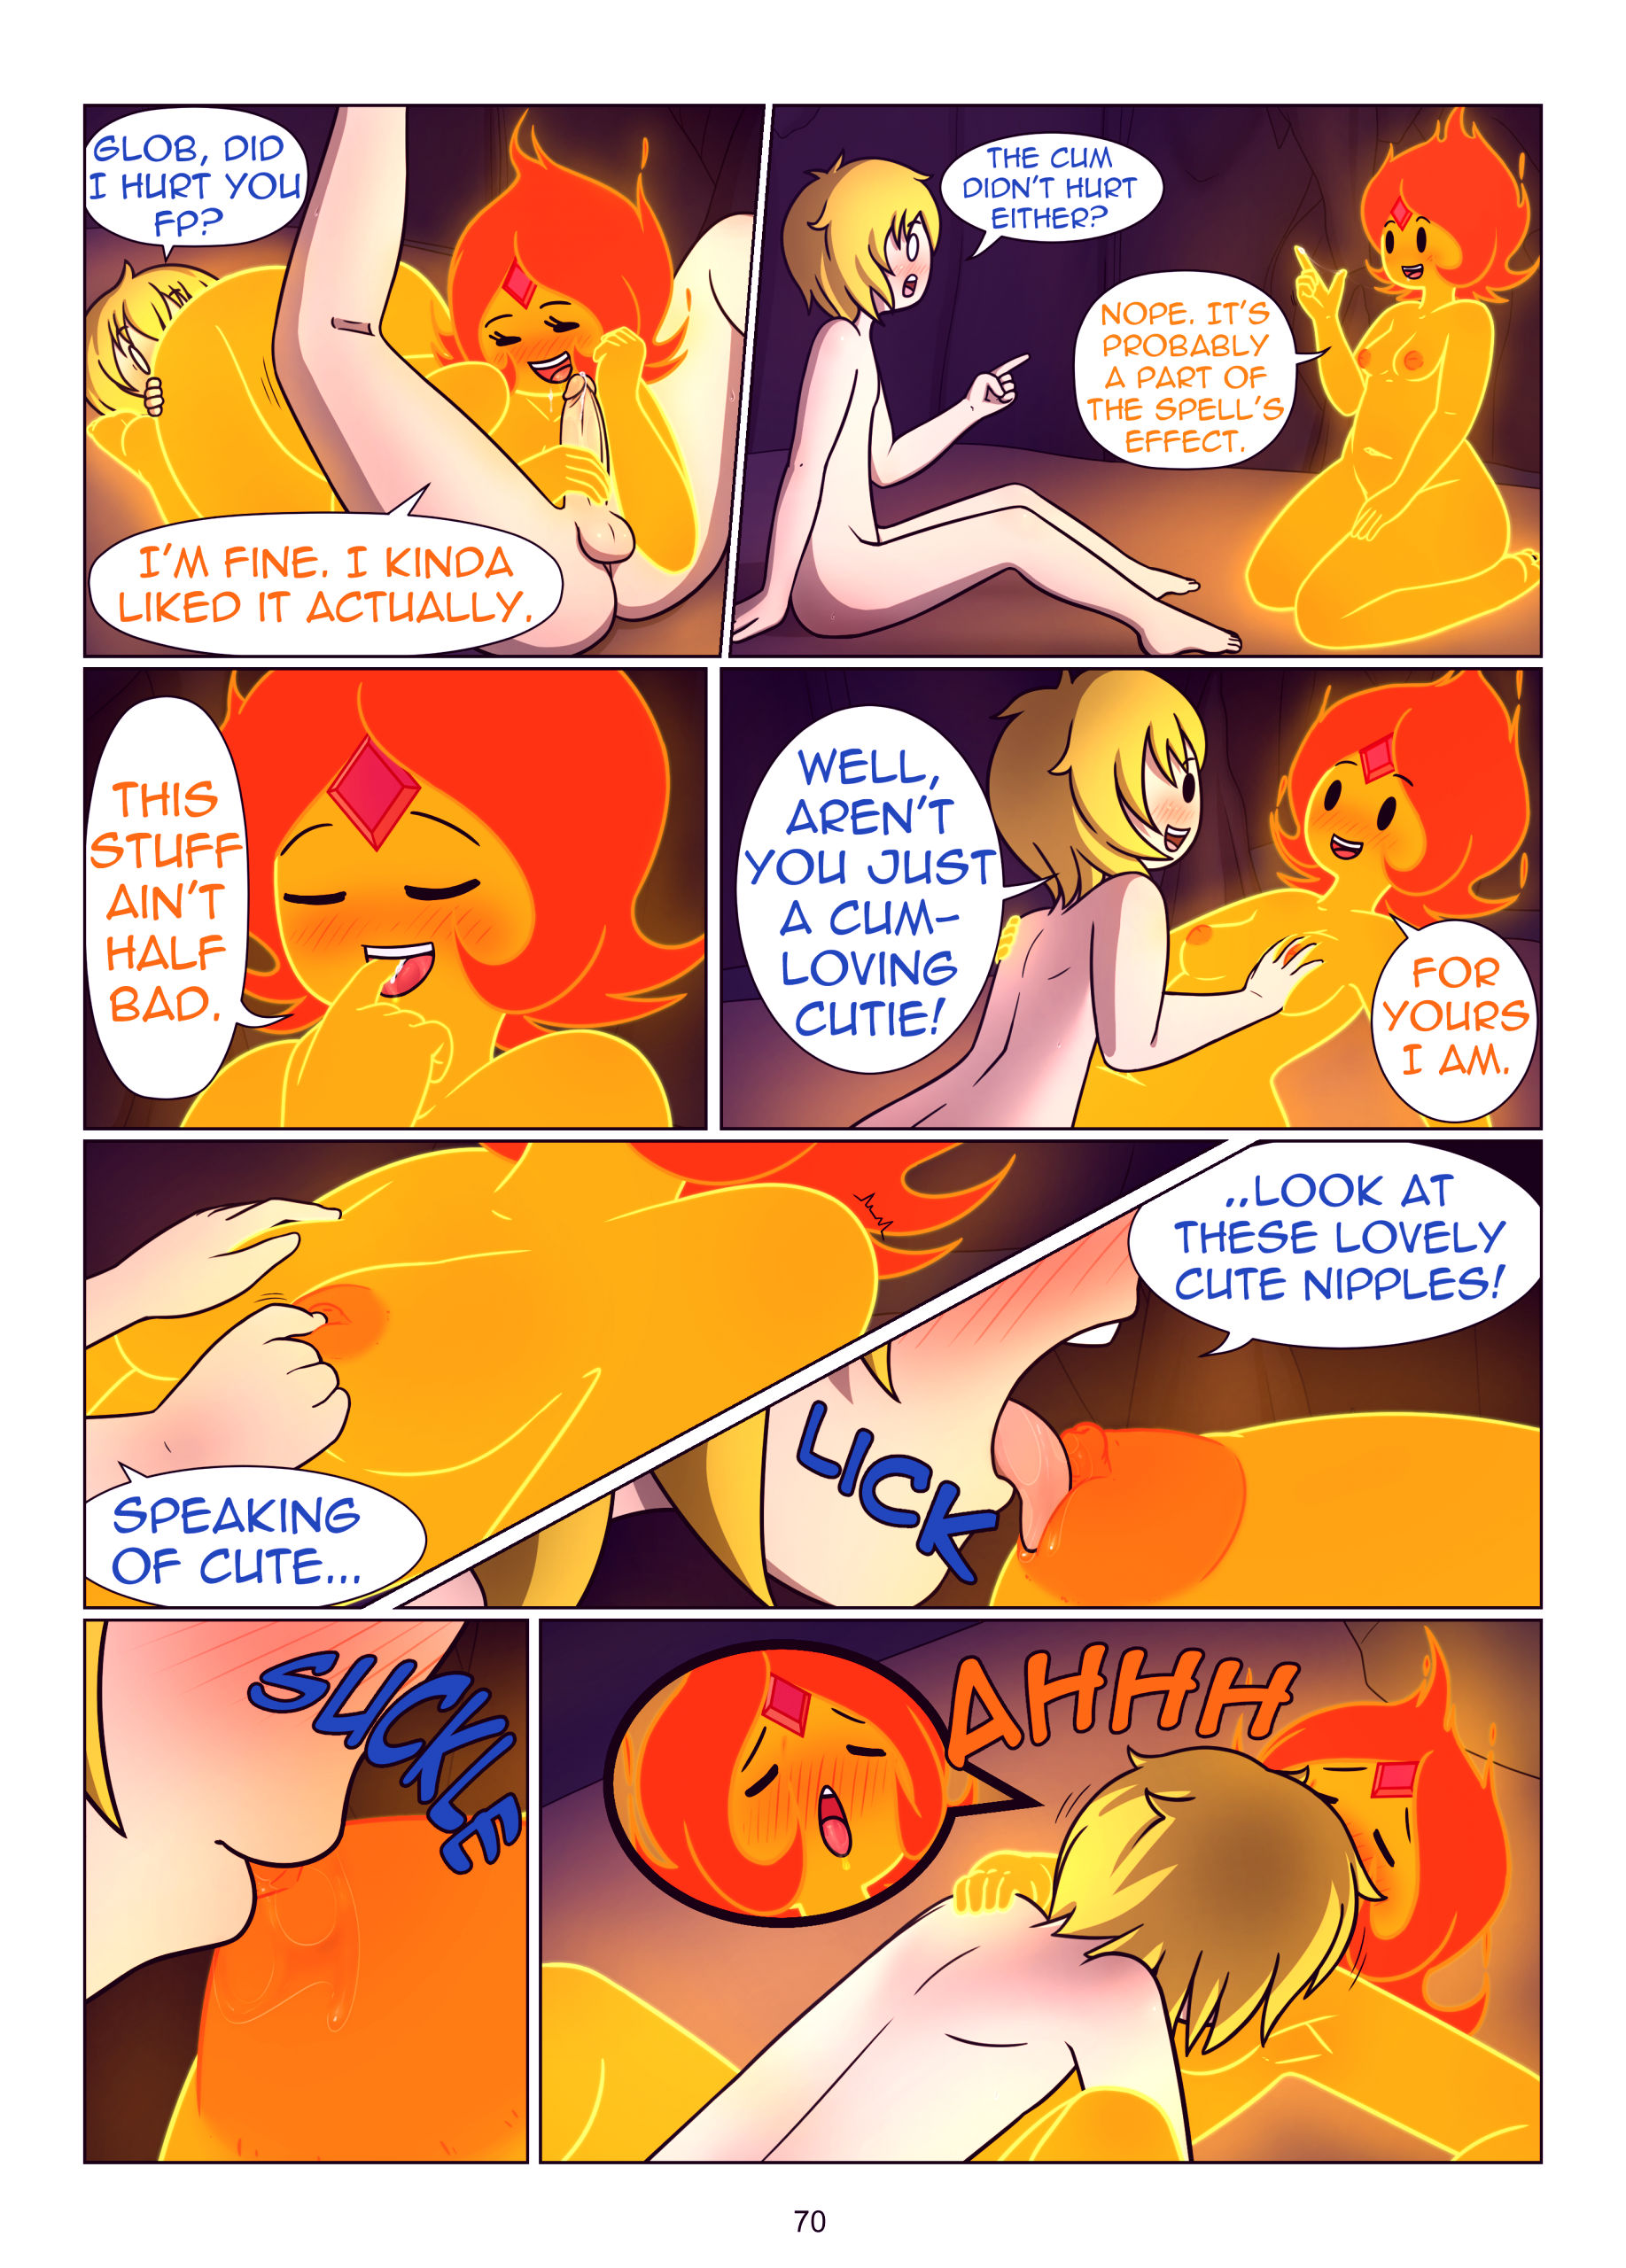 Misadventure time the collection porn comic picture 71